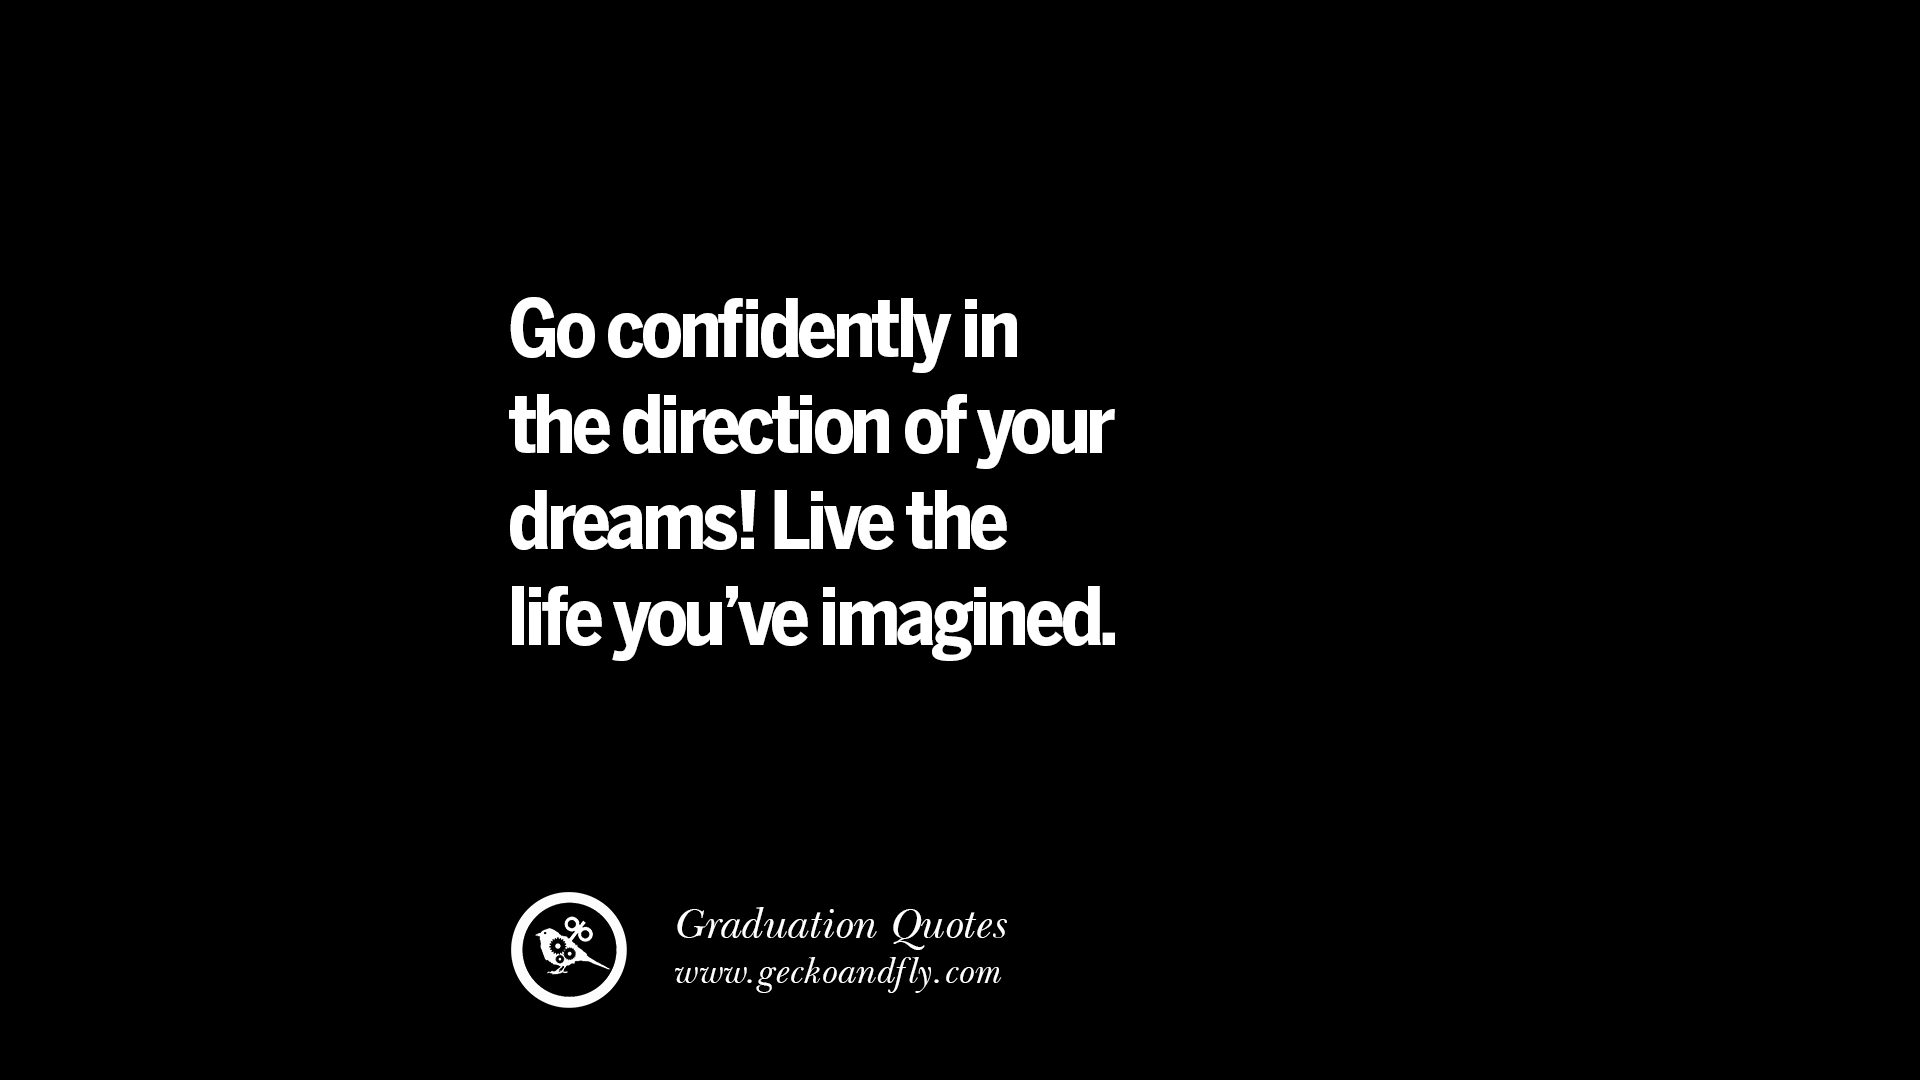 Go confidently in the direction of your dreams Live the life you ve imagined